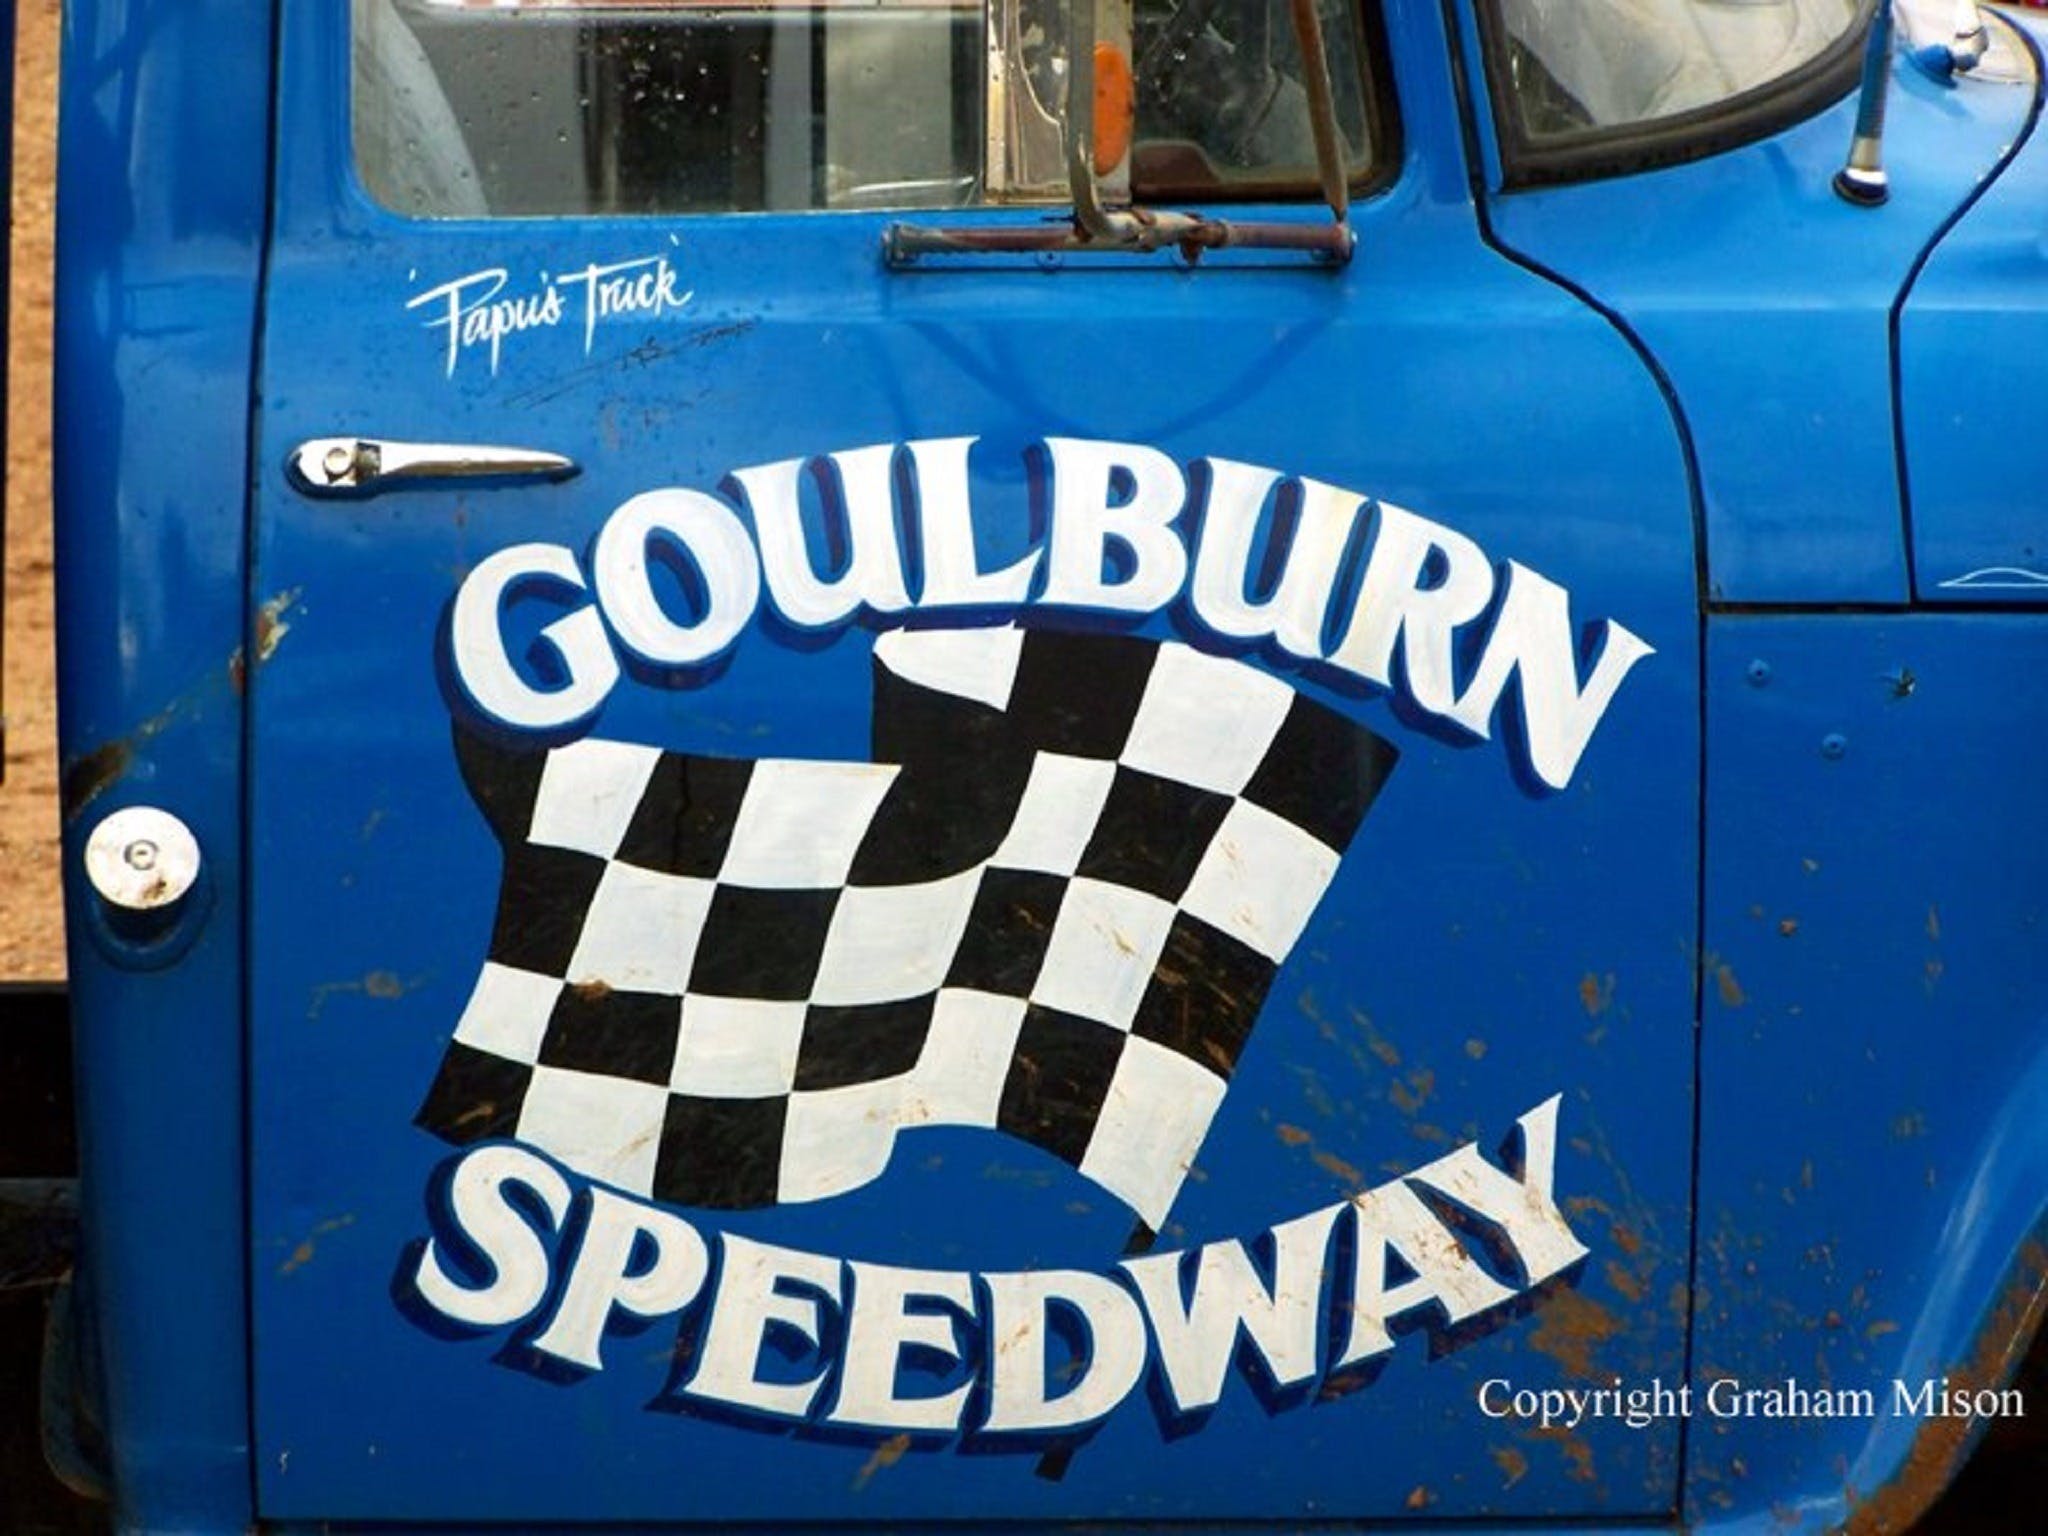 50 years of racing at Goulburn Speedway - Surfers Gold Coast